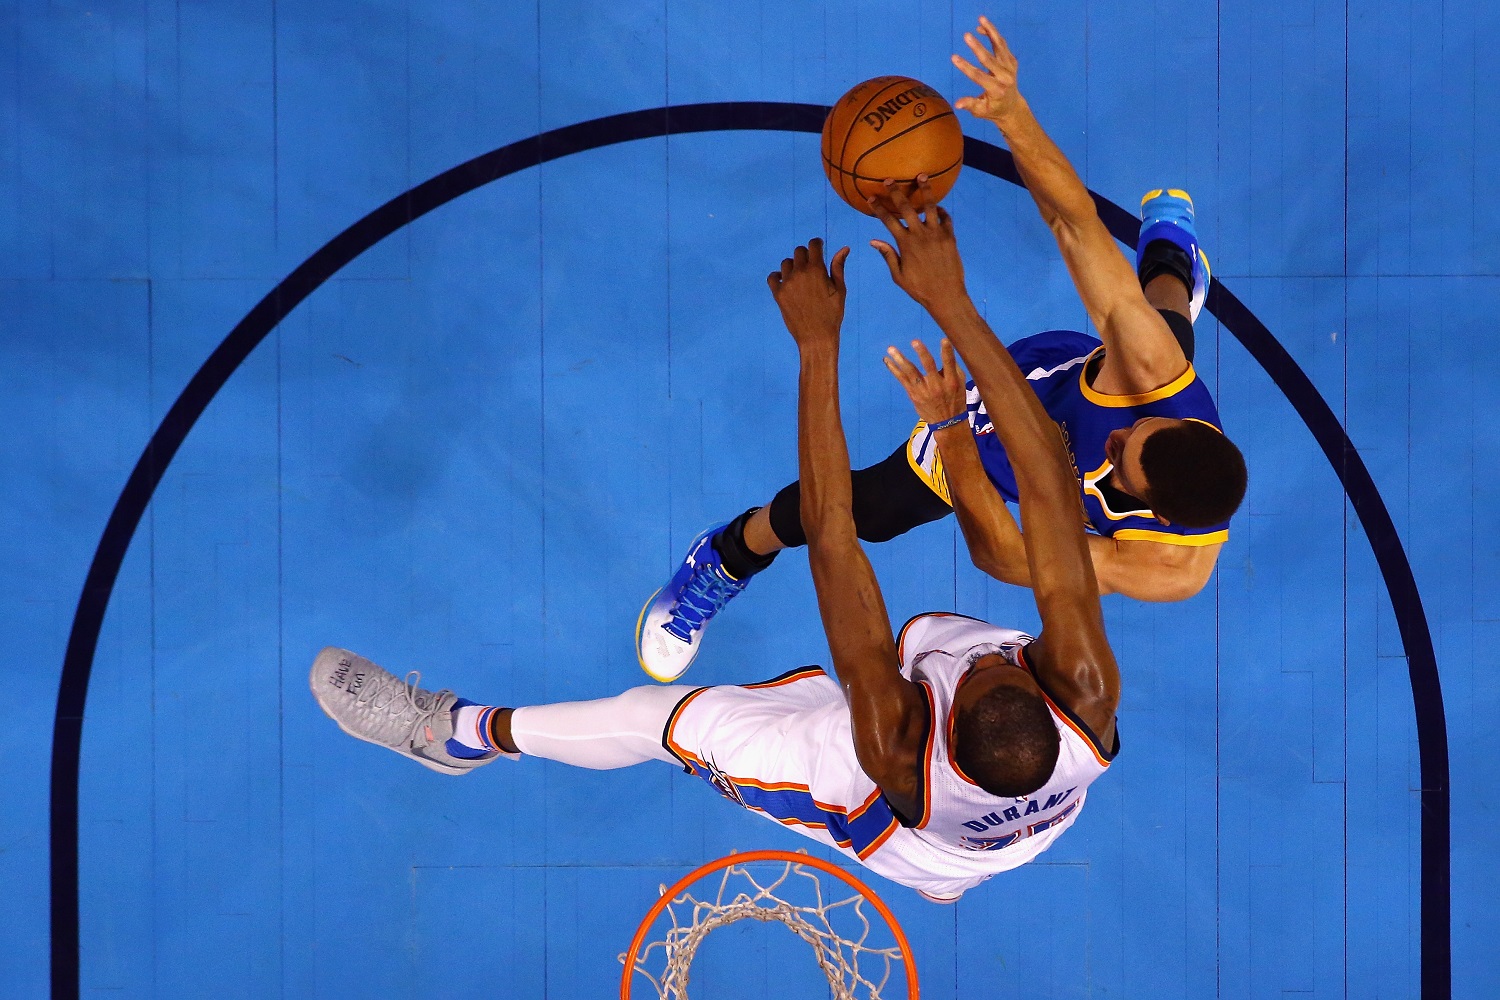 OKLAHOMA CITY, OK - MAY 28:  Kevin Durant #35 of the Oklahoma City Thunder defends Stephen Curry #30 of the Golden State Warriors during the first half in game six of the Western Conference Finals during the 2016 NBA Playoffs at Chesapeake Energy Arena on May 28, 2016 in Oklahoma City, Oklahoma. NOTE TO USER: User expressly acknowledges and agrees that, by downloading and or using this photograph, User is consenting to the terms and conditions of the Getty Images License Agreement.  (Photo by Maddie Meyer/Getty Images)